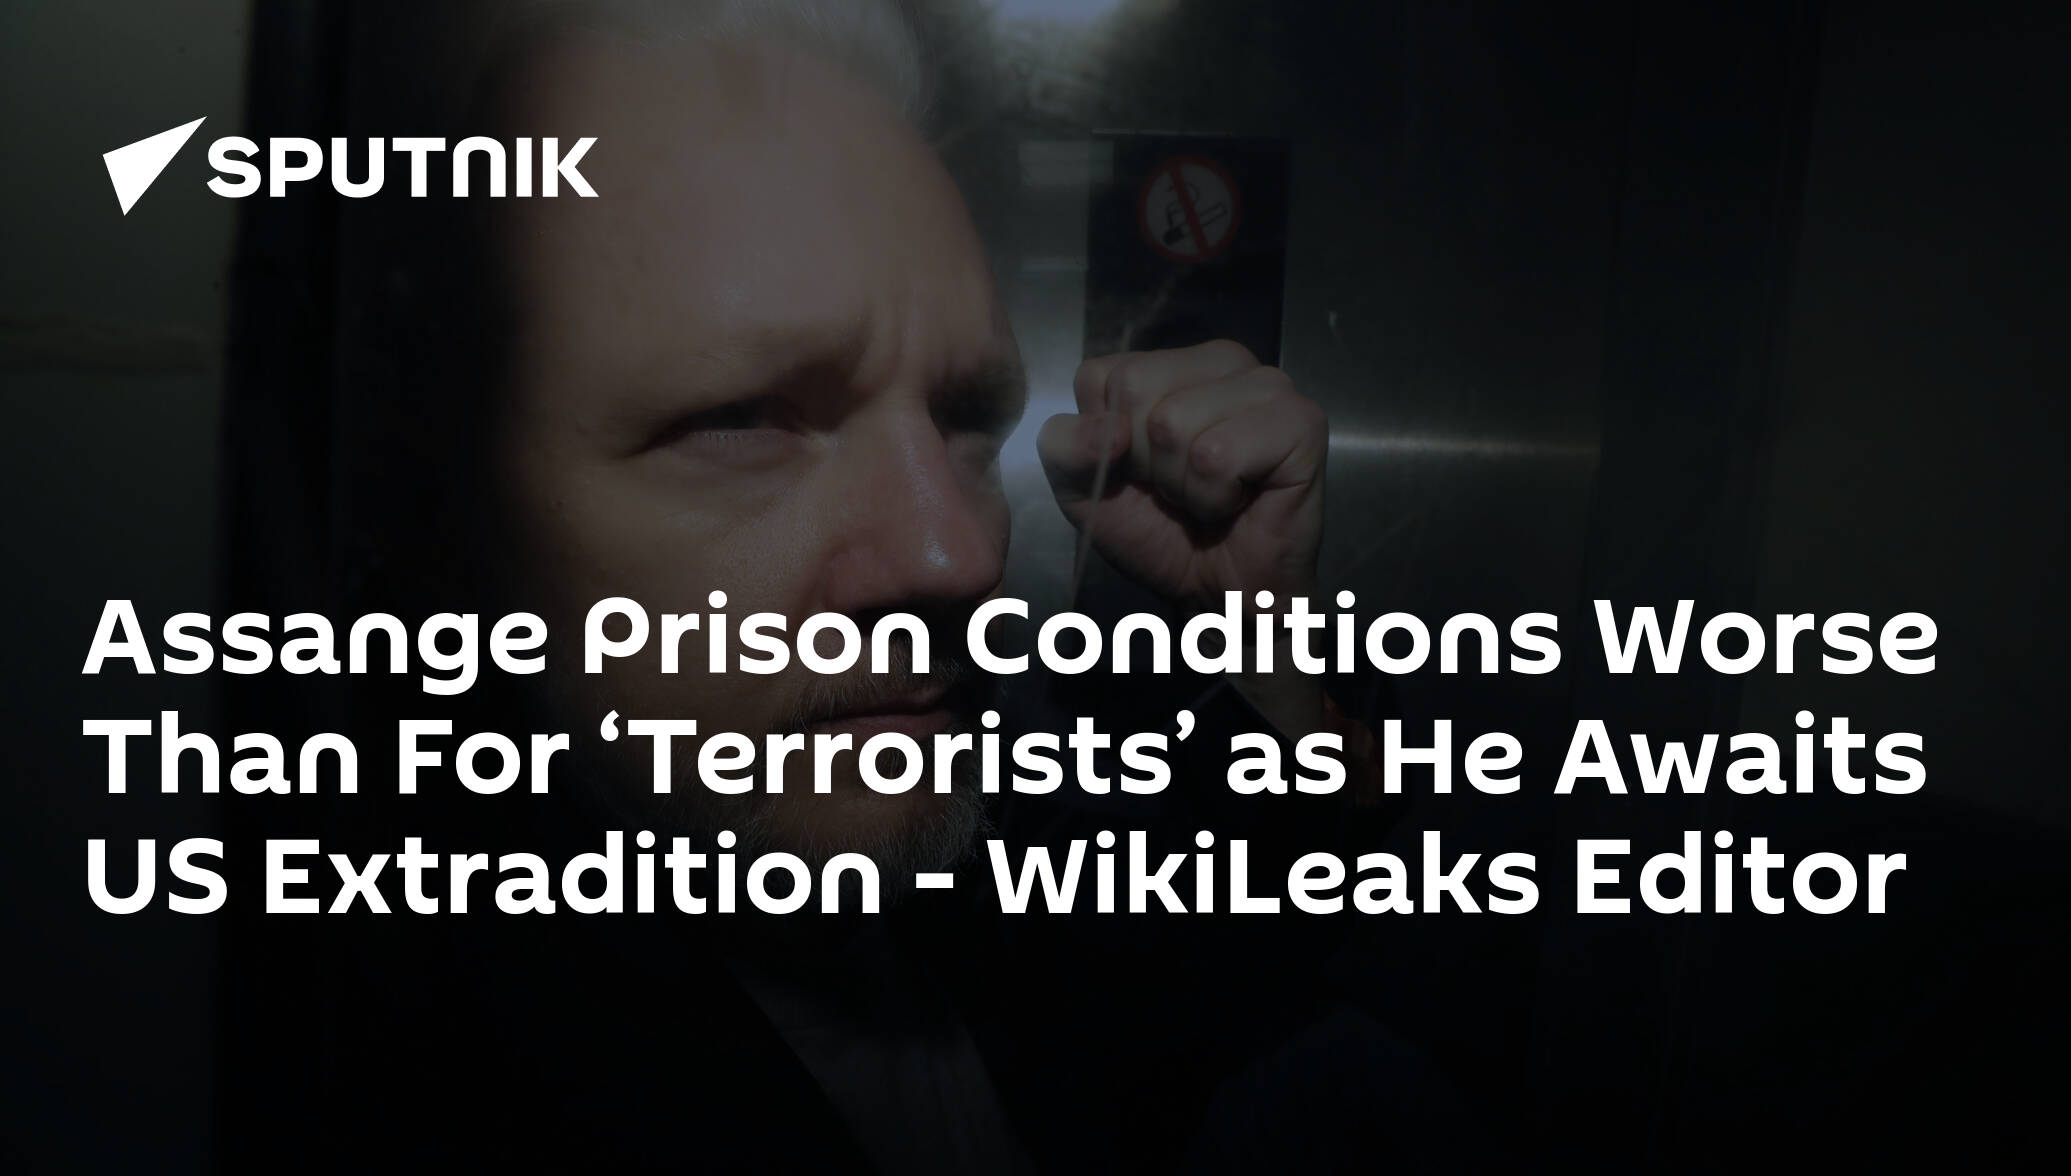 Assange Prison Conditions Worse Than For ‘Terrorists’ as He Awaits US Extradition - WikiLeaks Editor